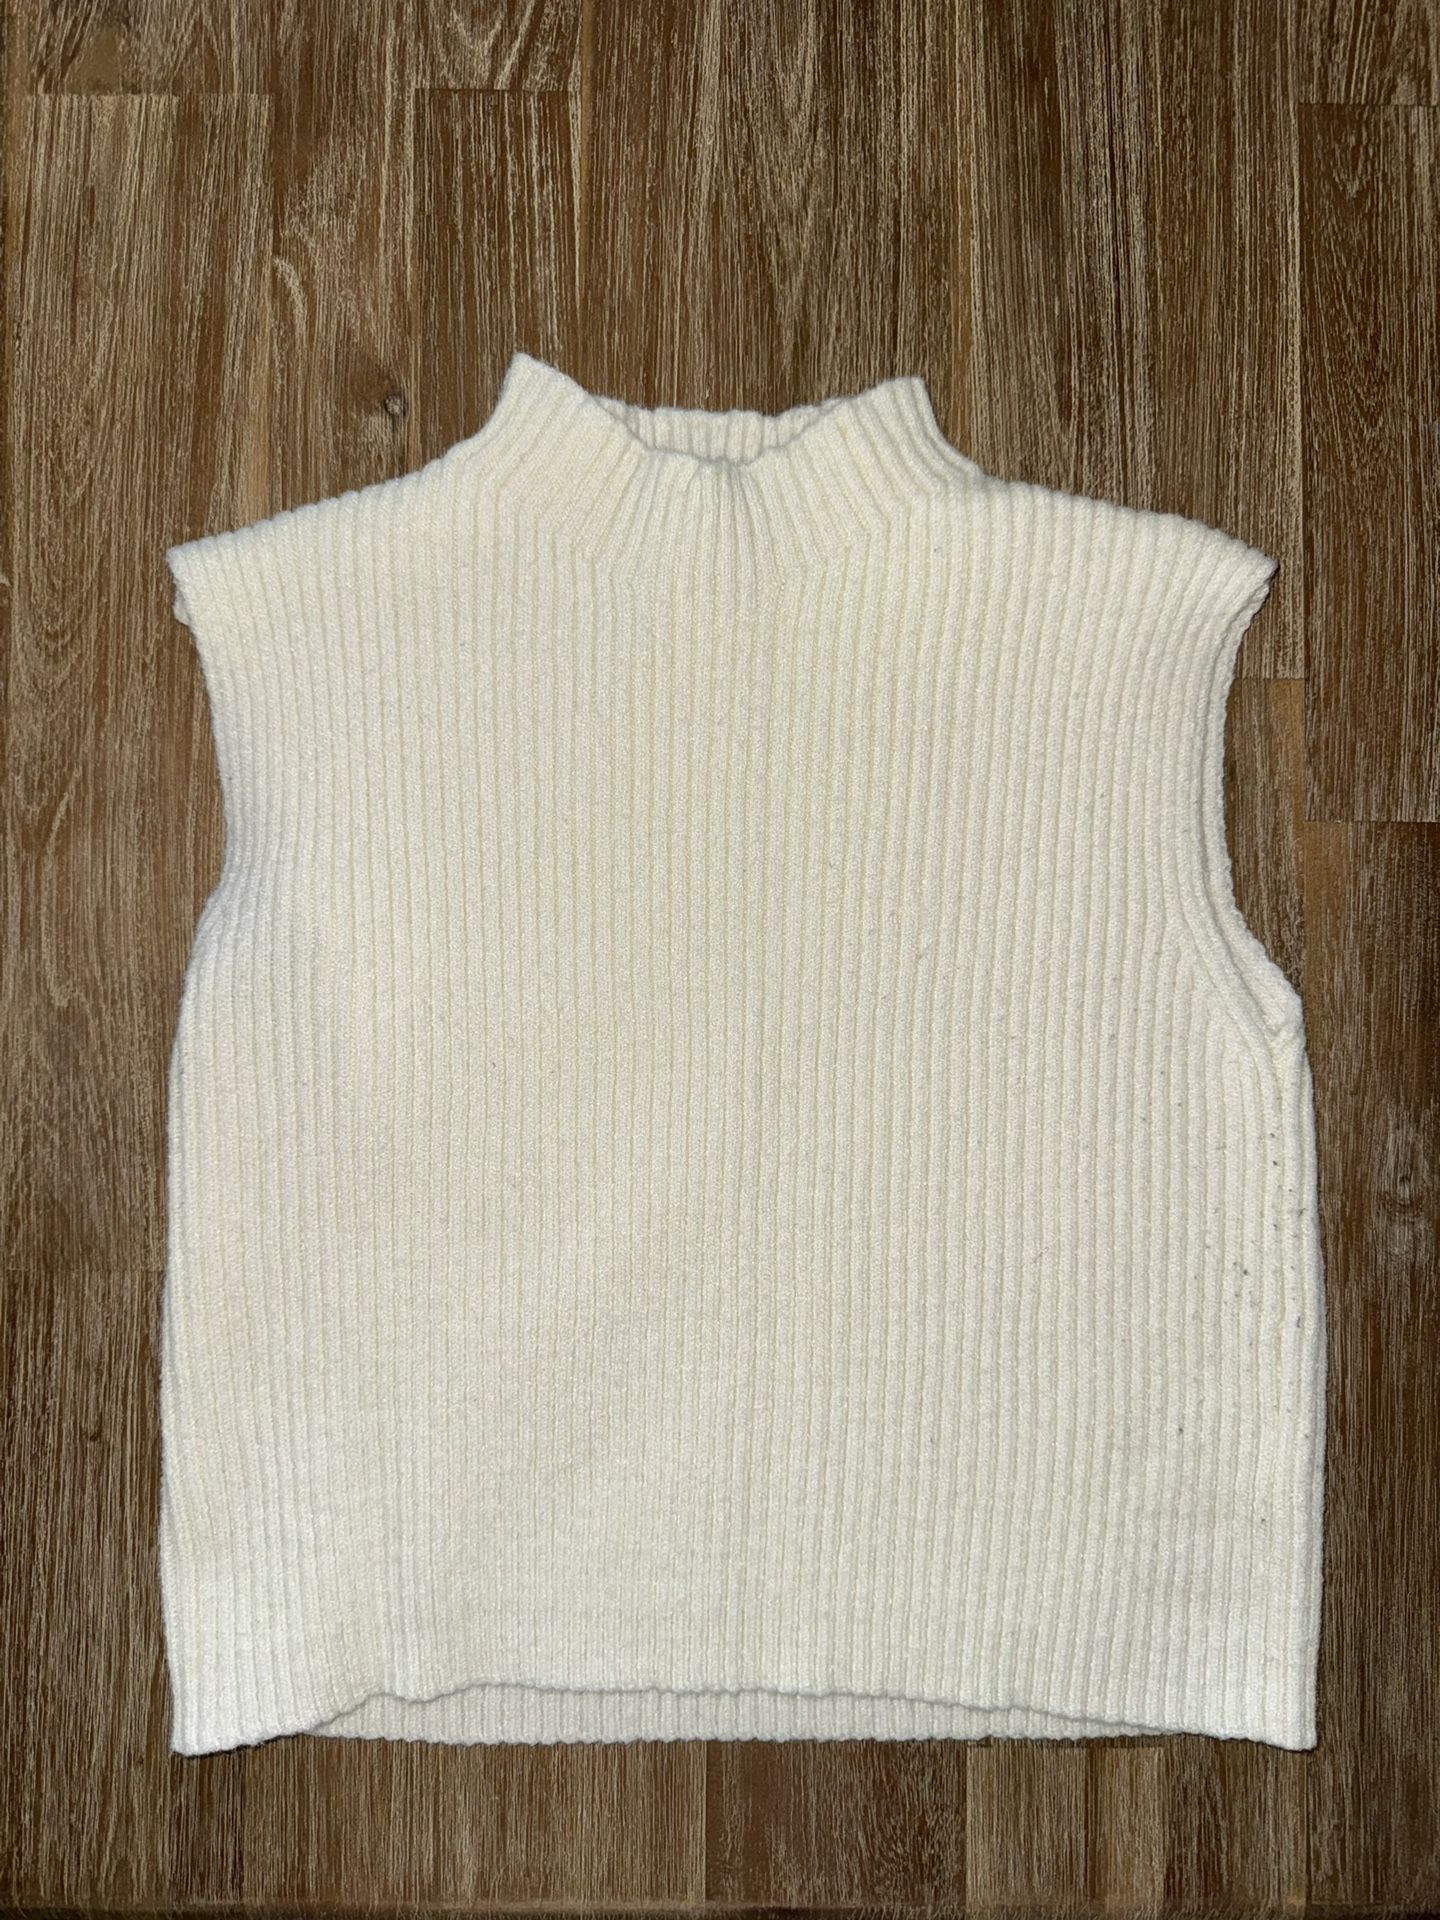 Princess Polly Cream Sweater Knit Vest Top